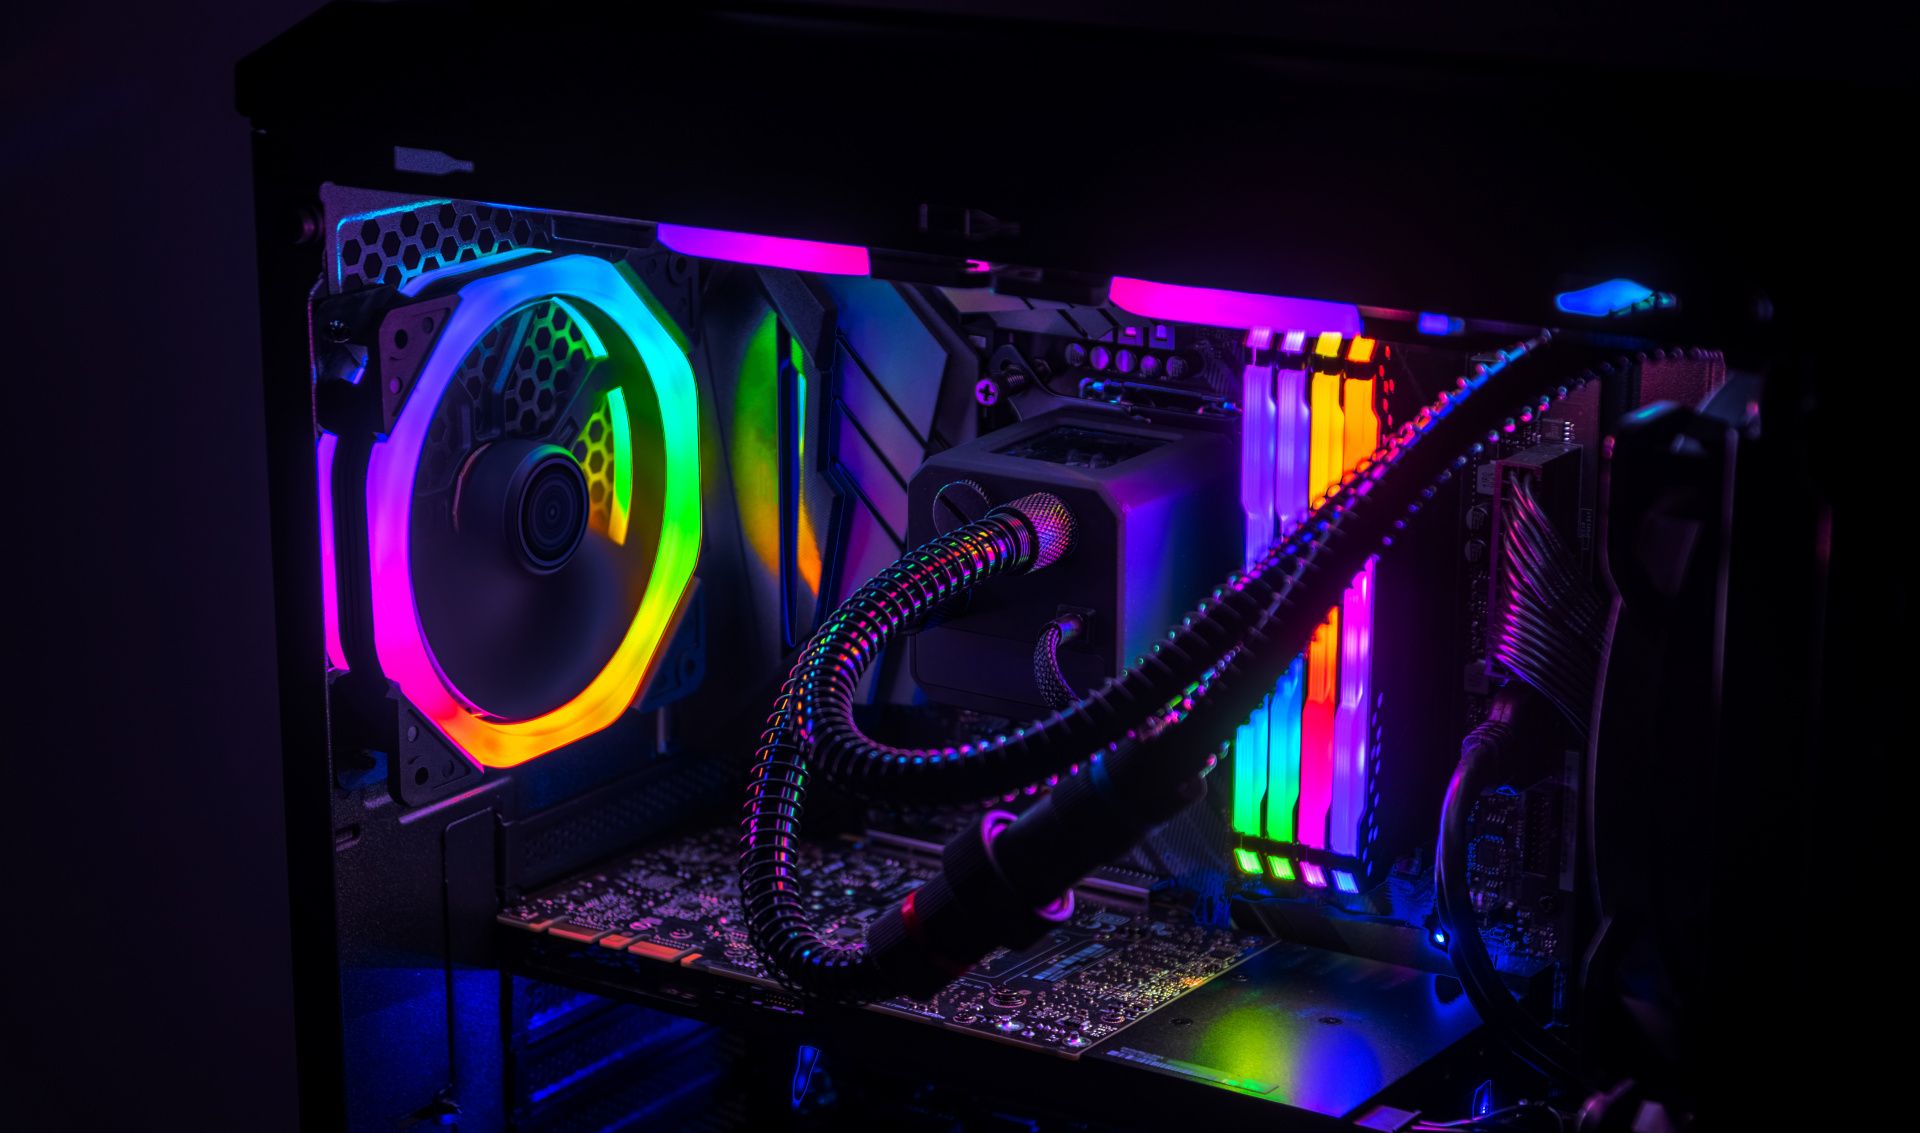 Gaming PC lit up with loads of RGB lighting